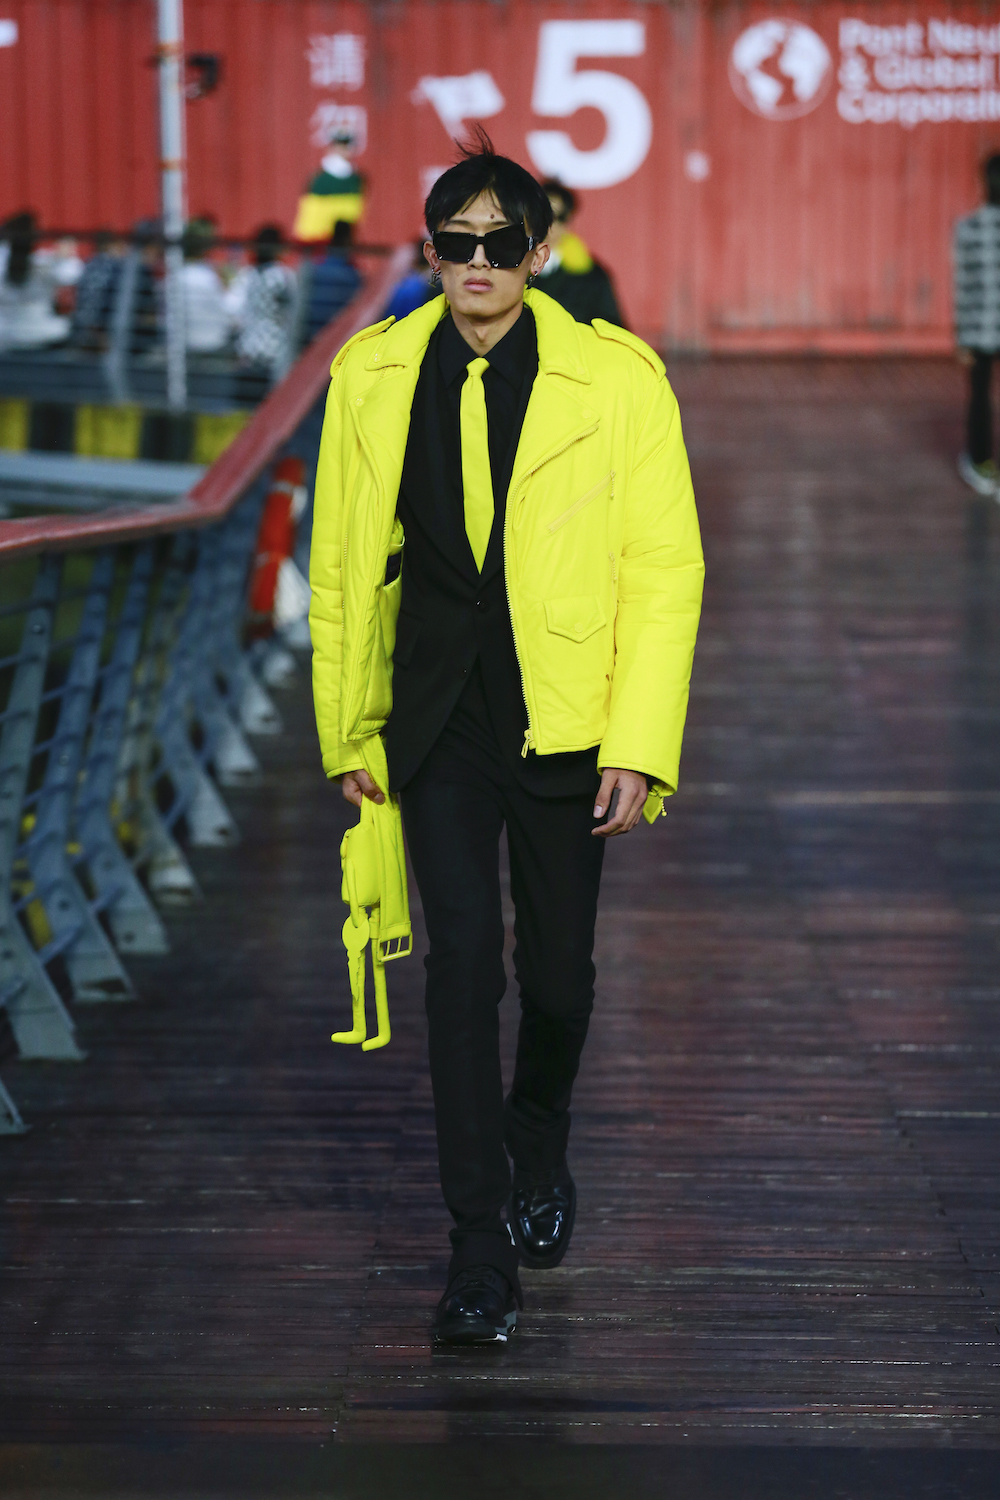 Louis Vuitton SS21 menswear: Abloh promotes upcycling and